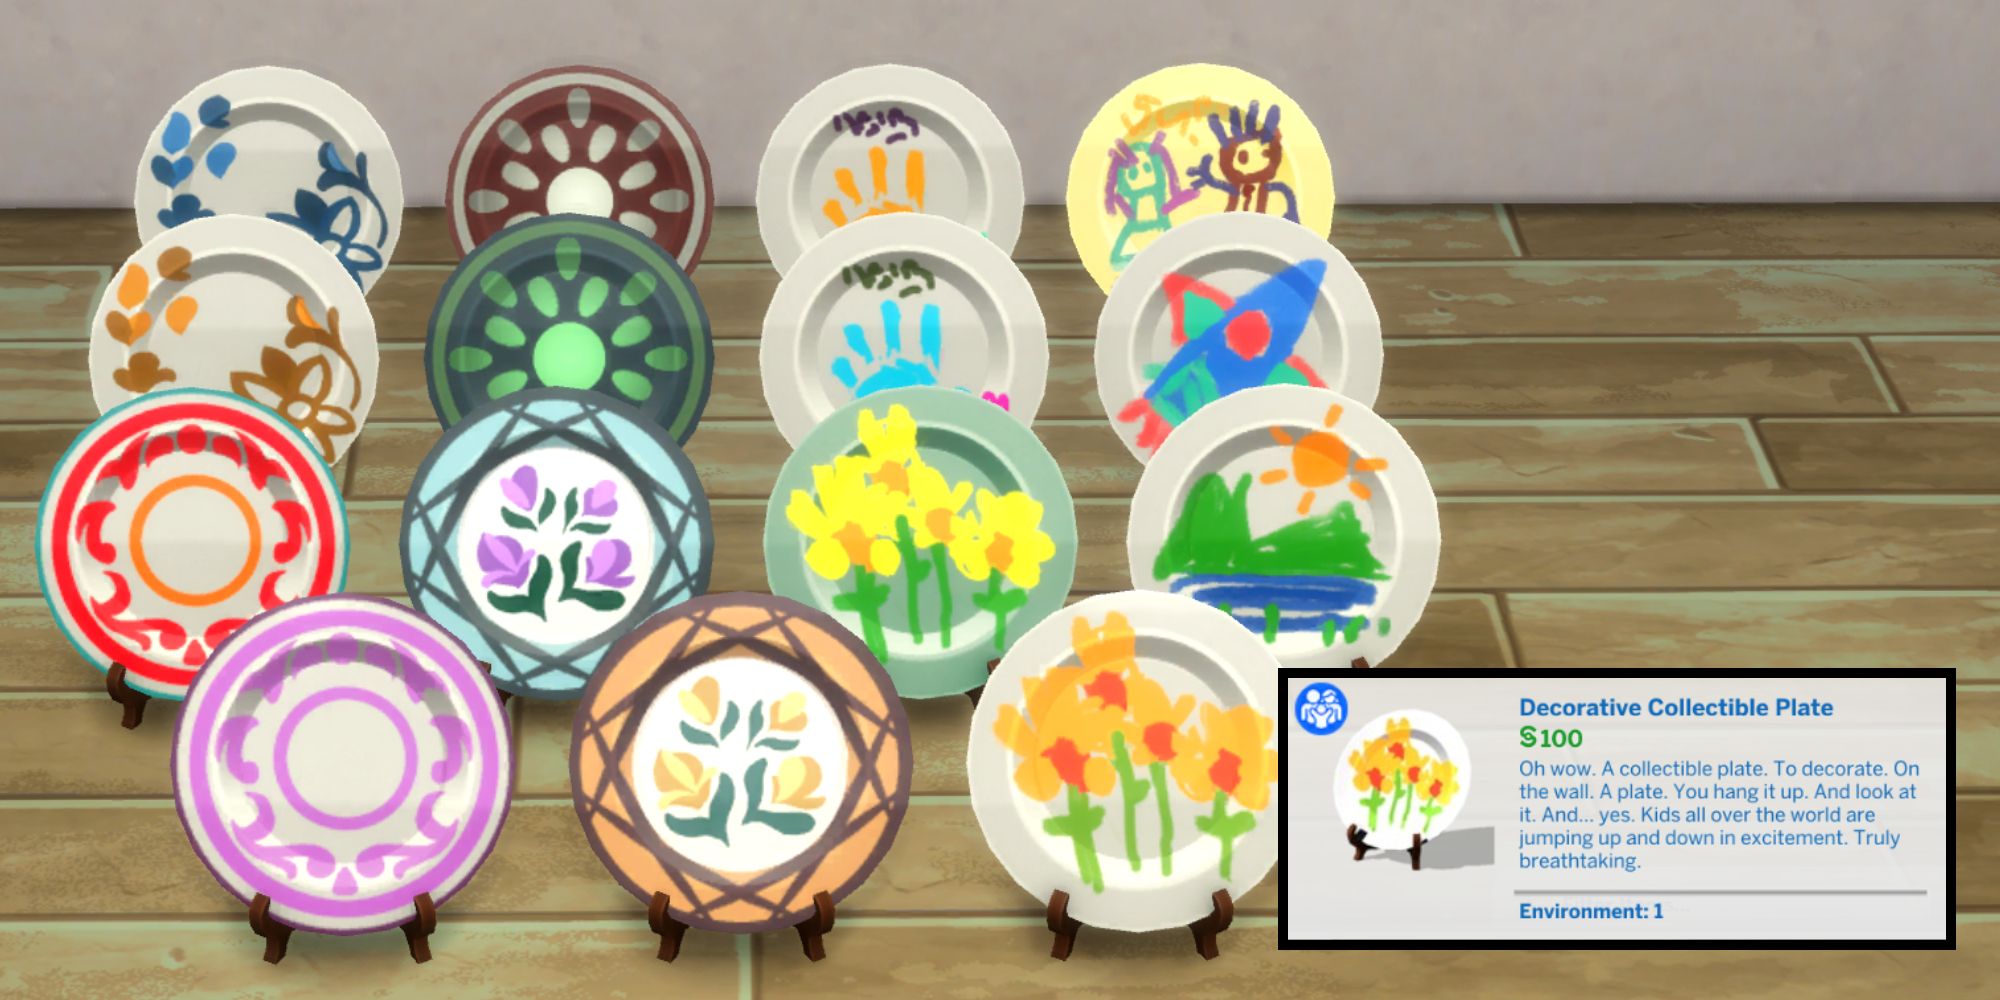 The Decorative Collectible Plate has a funny description with a mock serious tone from build/buy mode